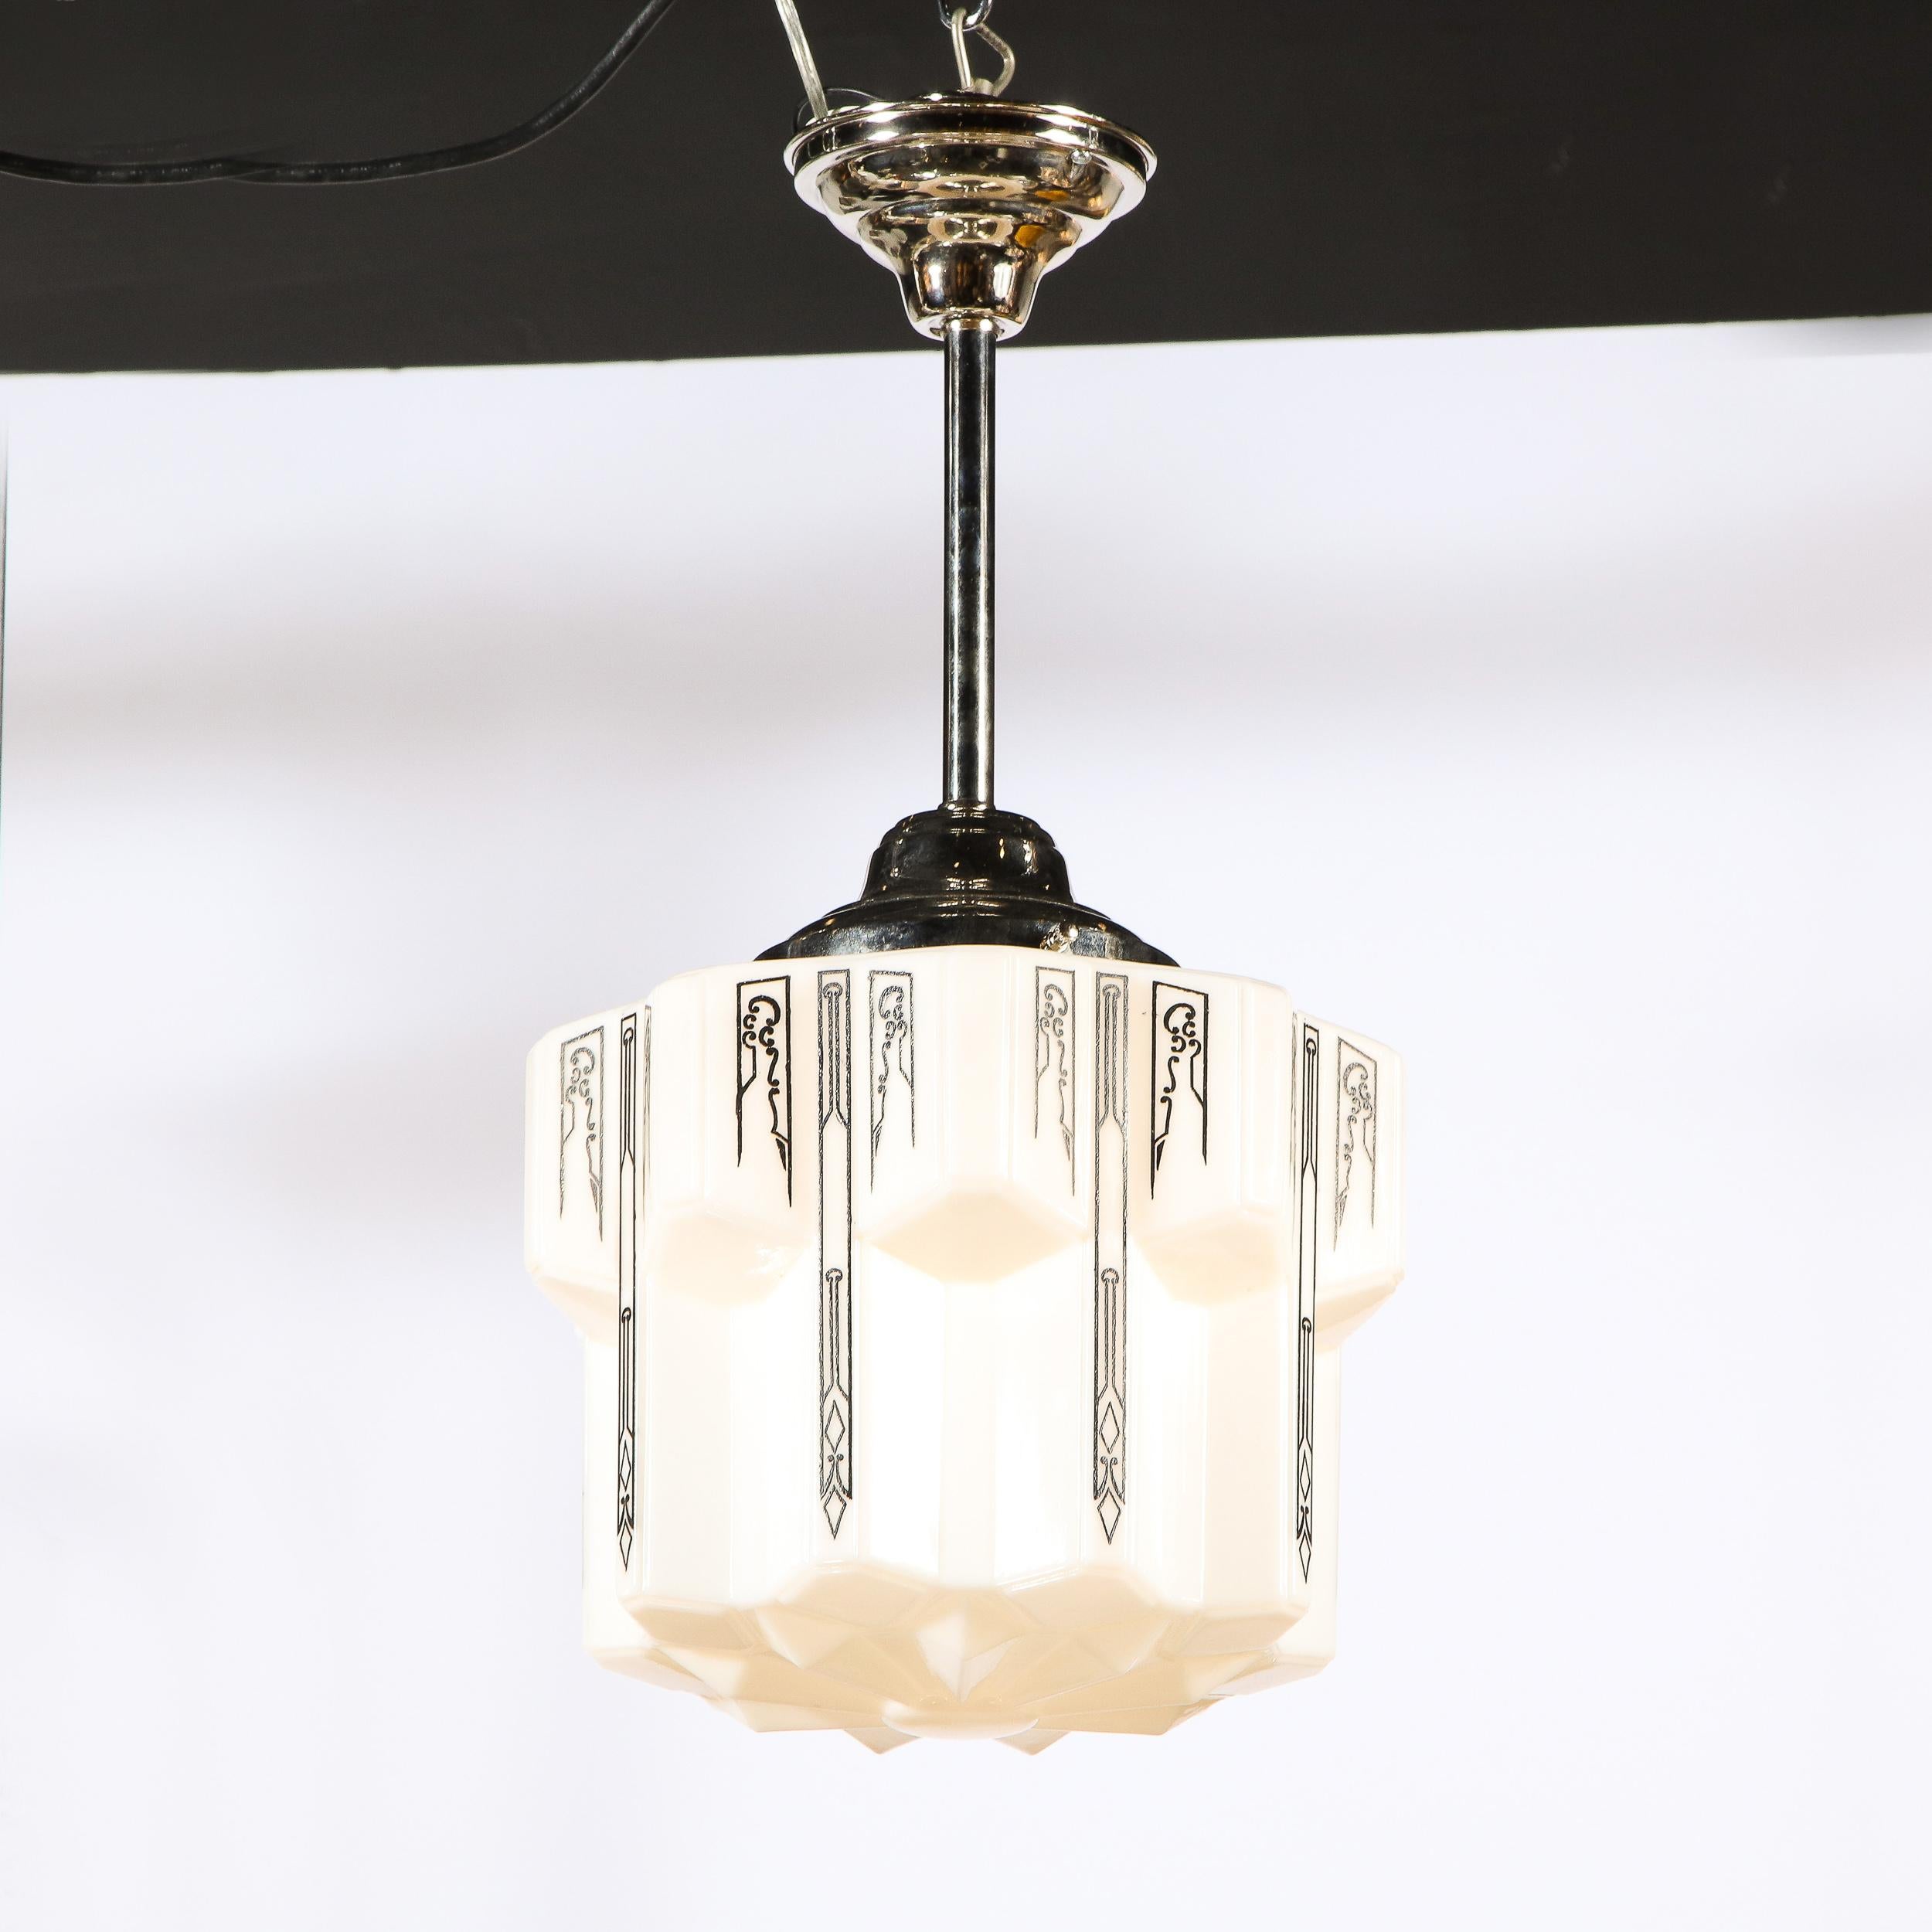 This refined and graphic Art Deco Machine Age pendant was realized in the United States circa 1935. It features a sculptural body with faceted sides adorned with abstract curvilinear detailing throughout The pendant is composed of white milk glass